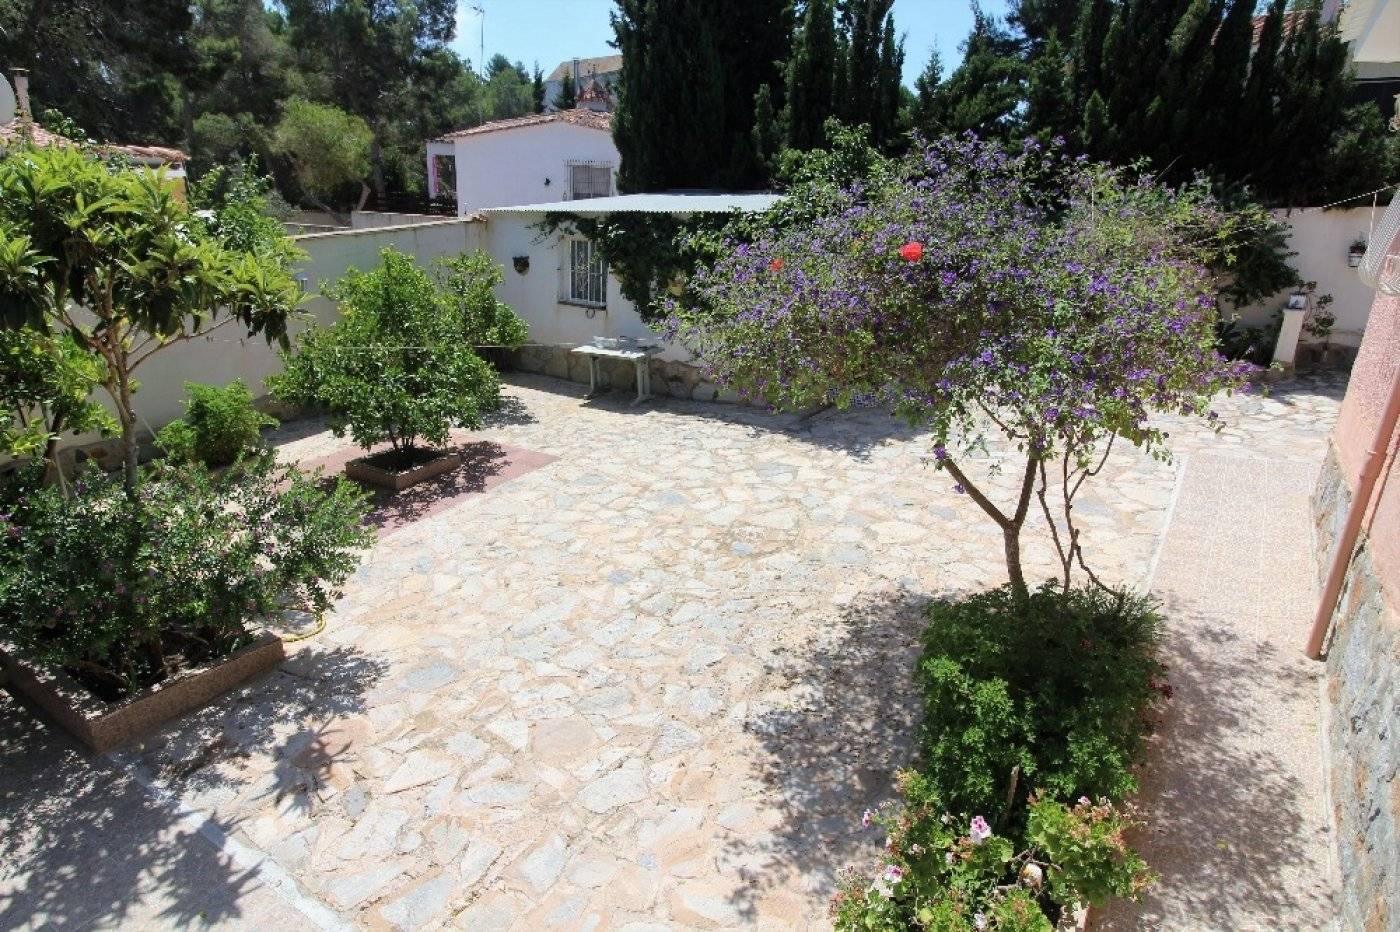 DETACHED VILLA WITH LARGE GARDEN AND OWN POOL ON THE BALCONIES